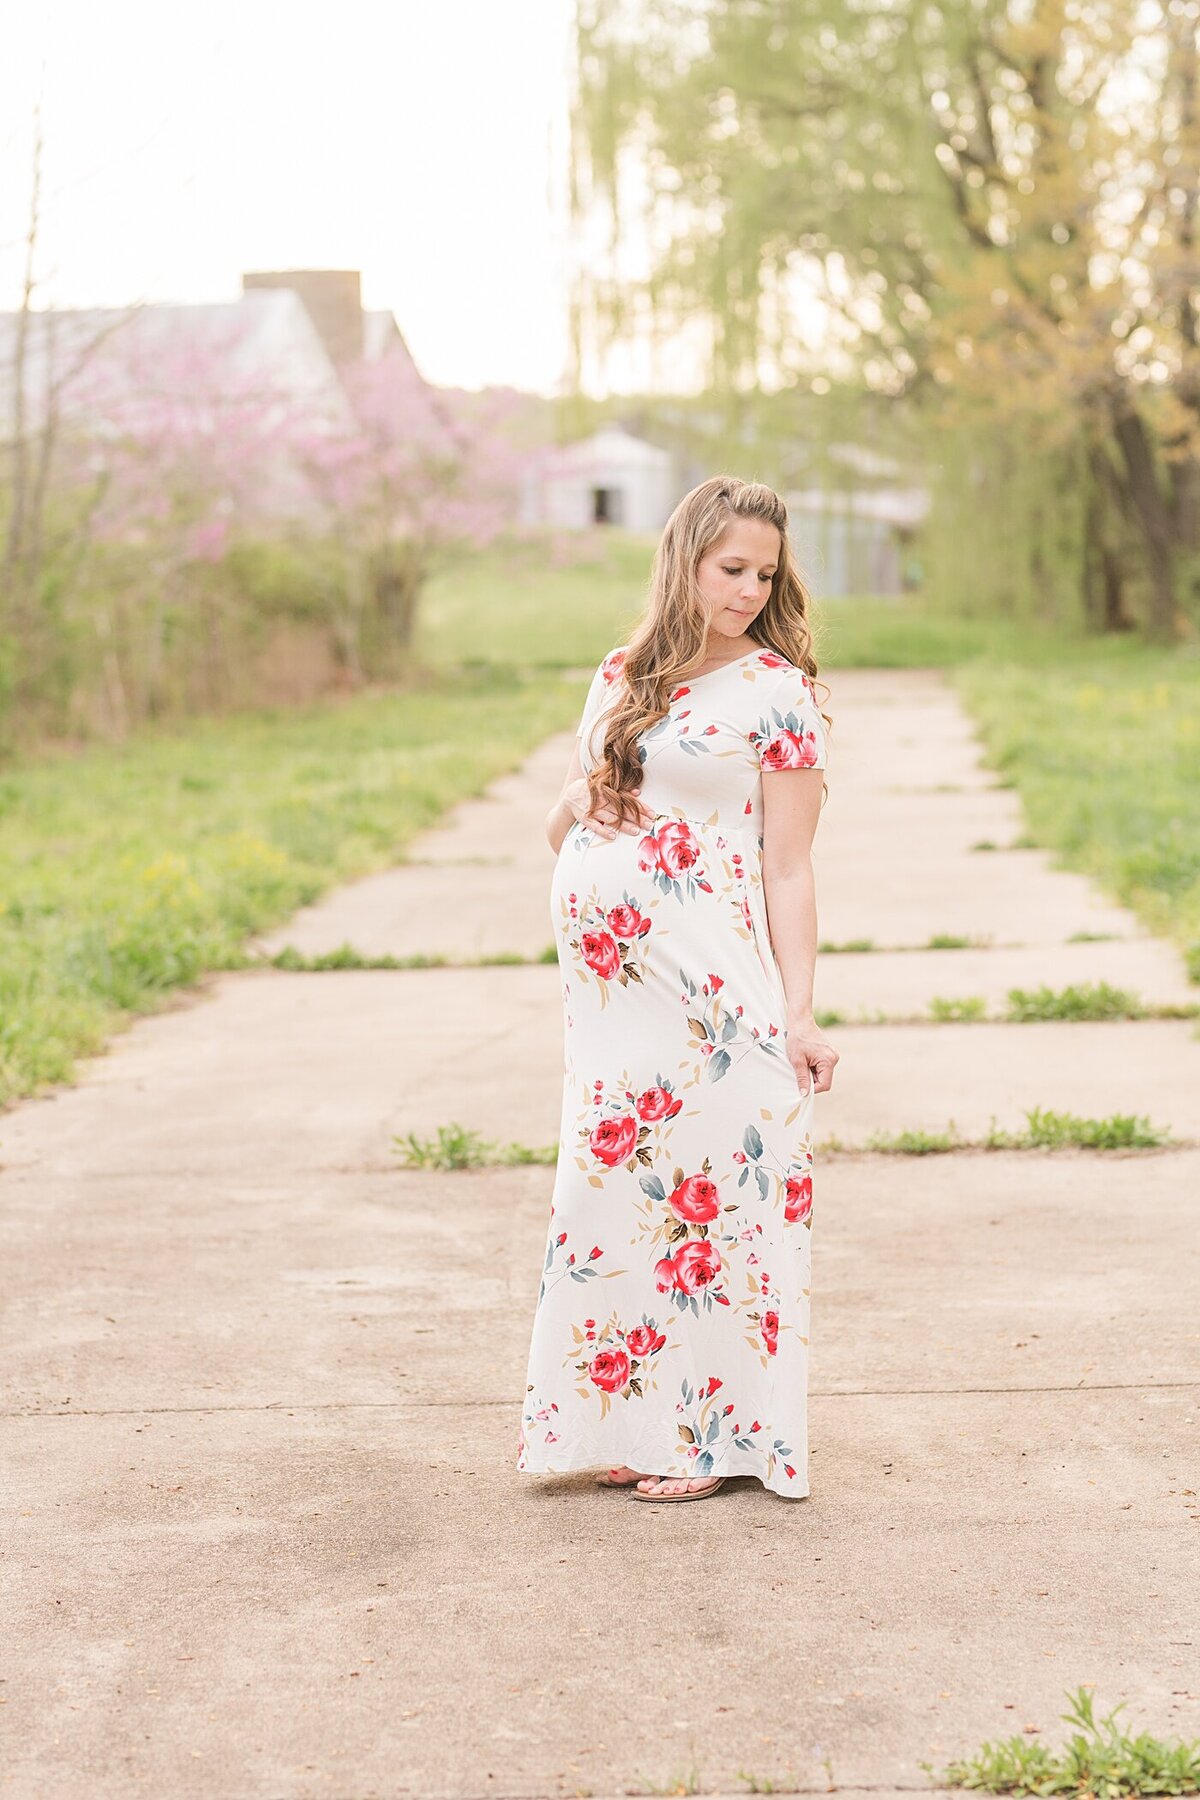 Mommy to be on sidewalk in a floral dress during her maternity session in hickory nc